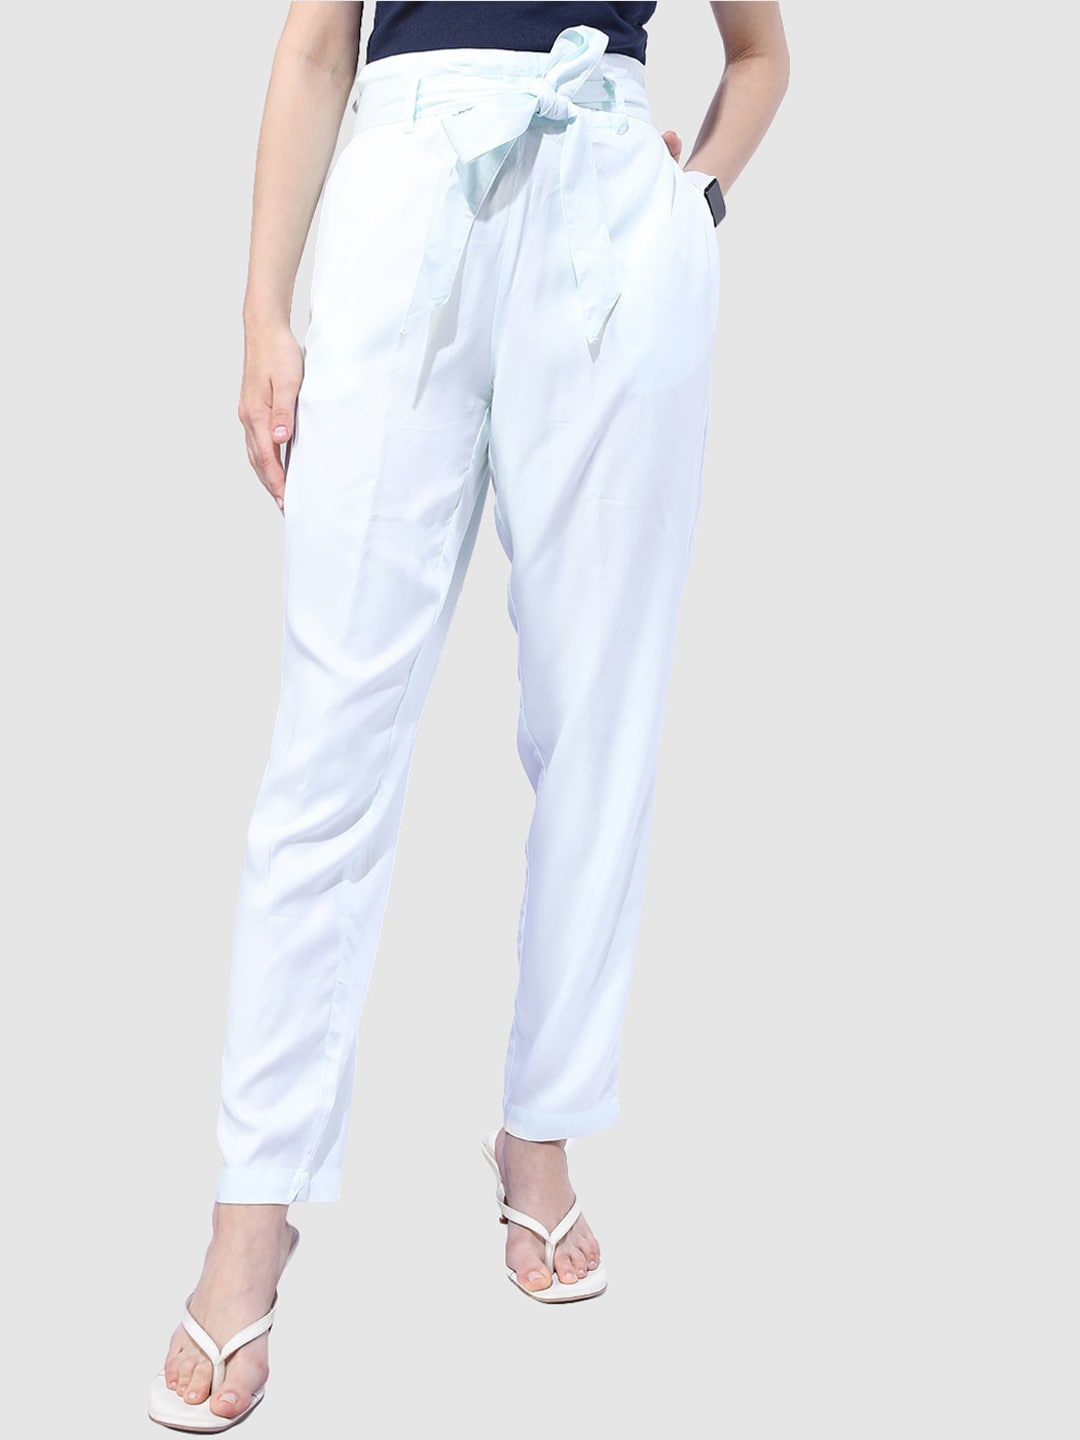 Shop Women Solid Tapered Pants Online.